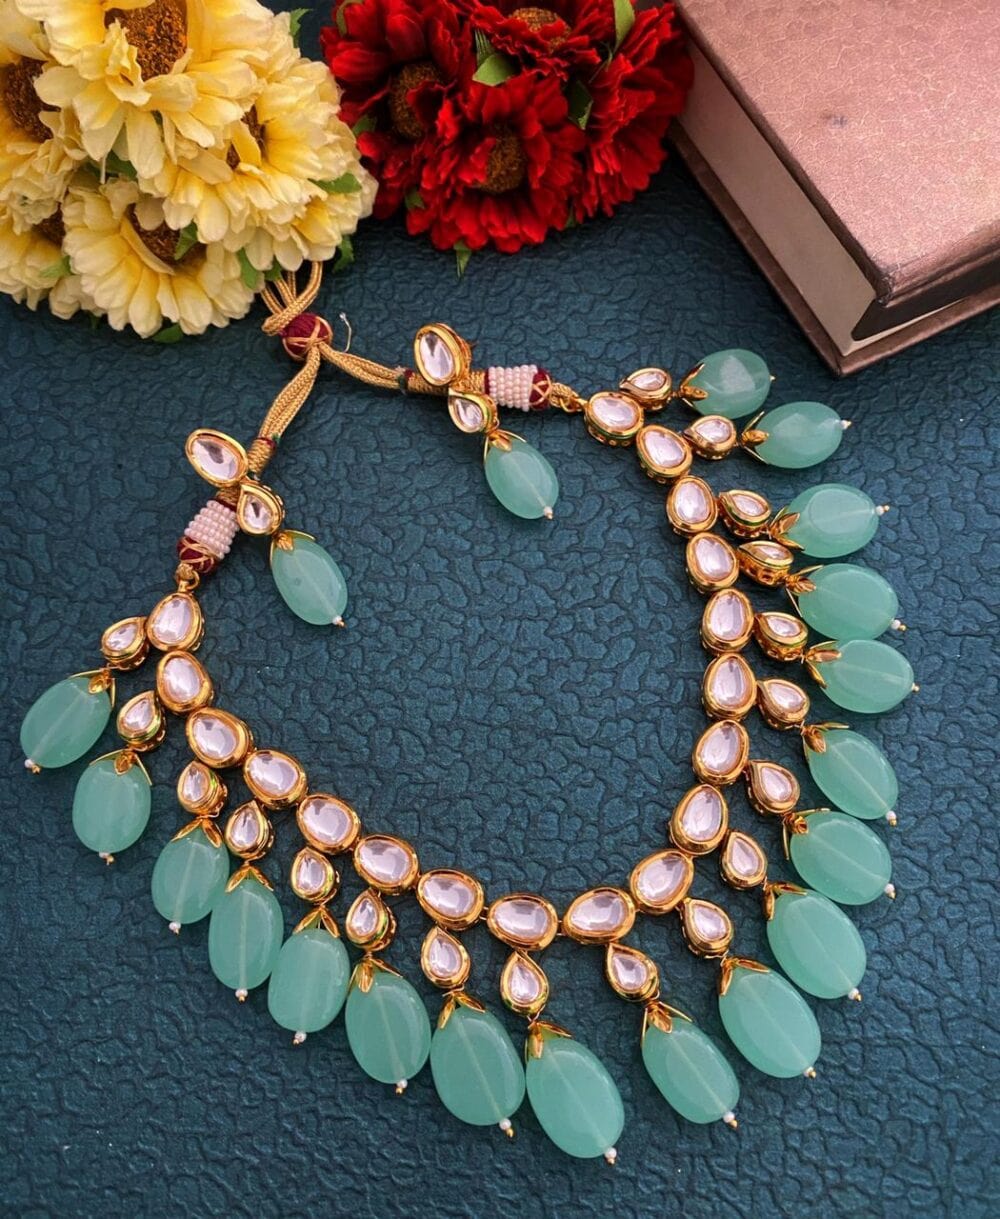 Traditional Gold Plated Kundan Necklace Set With Mint Green Stones By Gehna Shop Kundan Necklace Sets